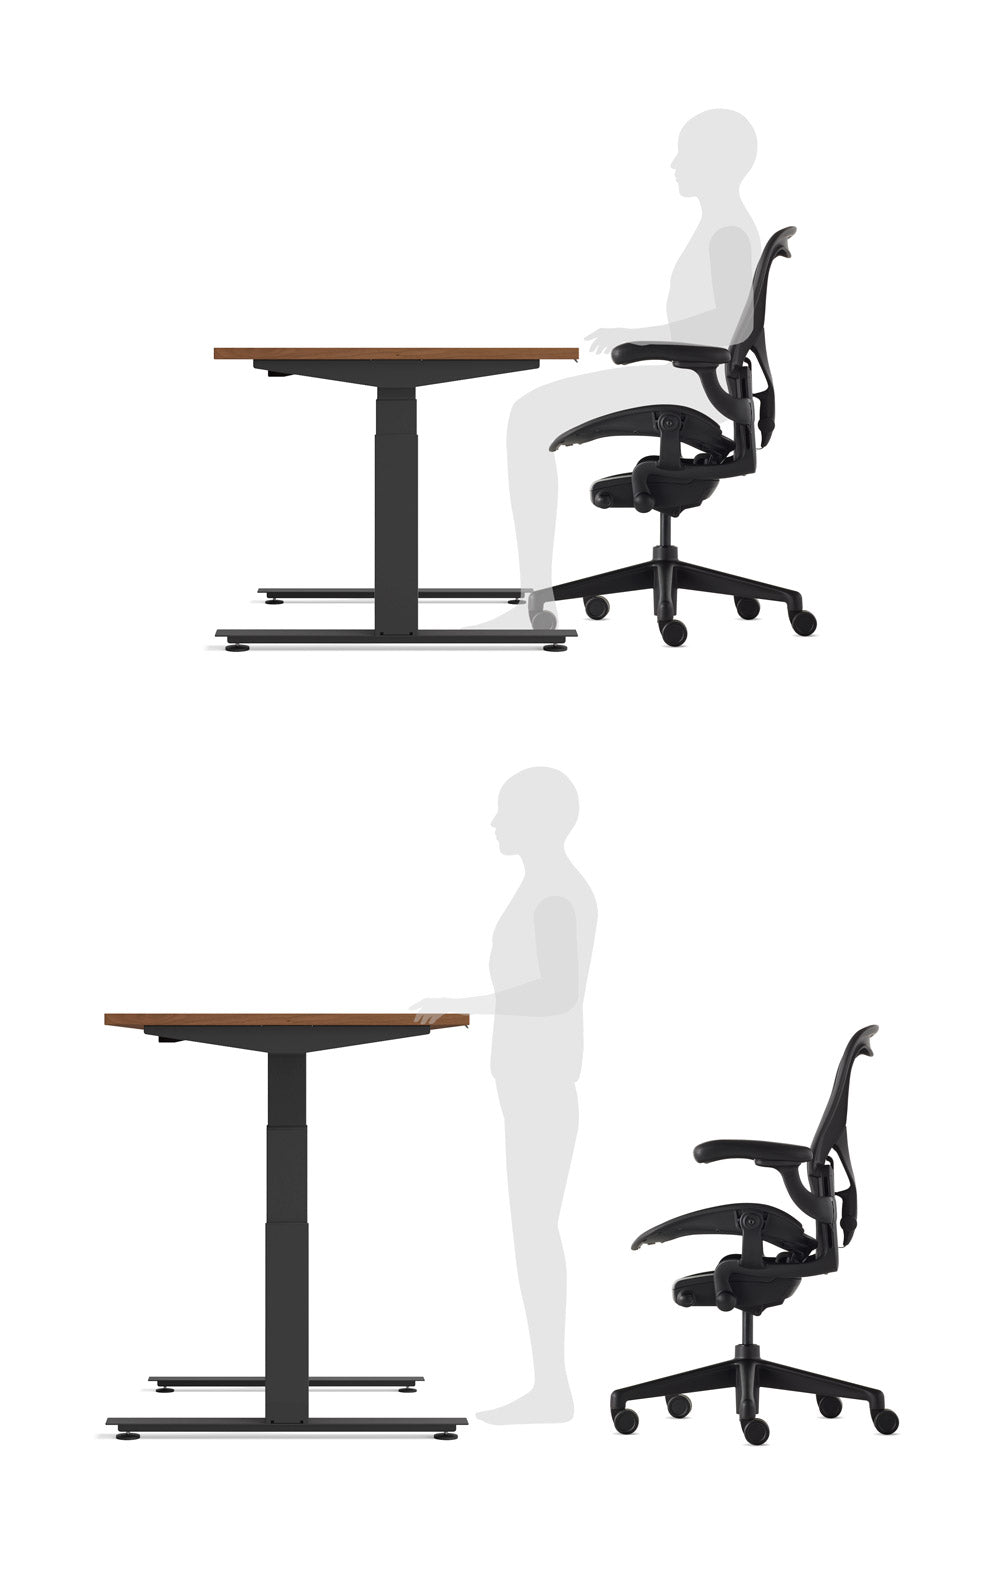 A diagram of a sit to stand office setup, showing both seated and standing configurations